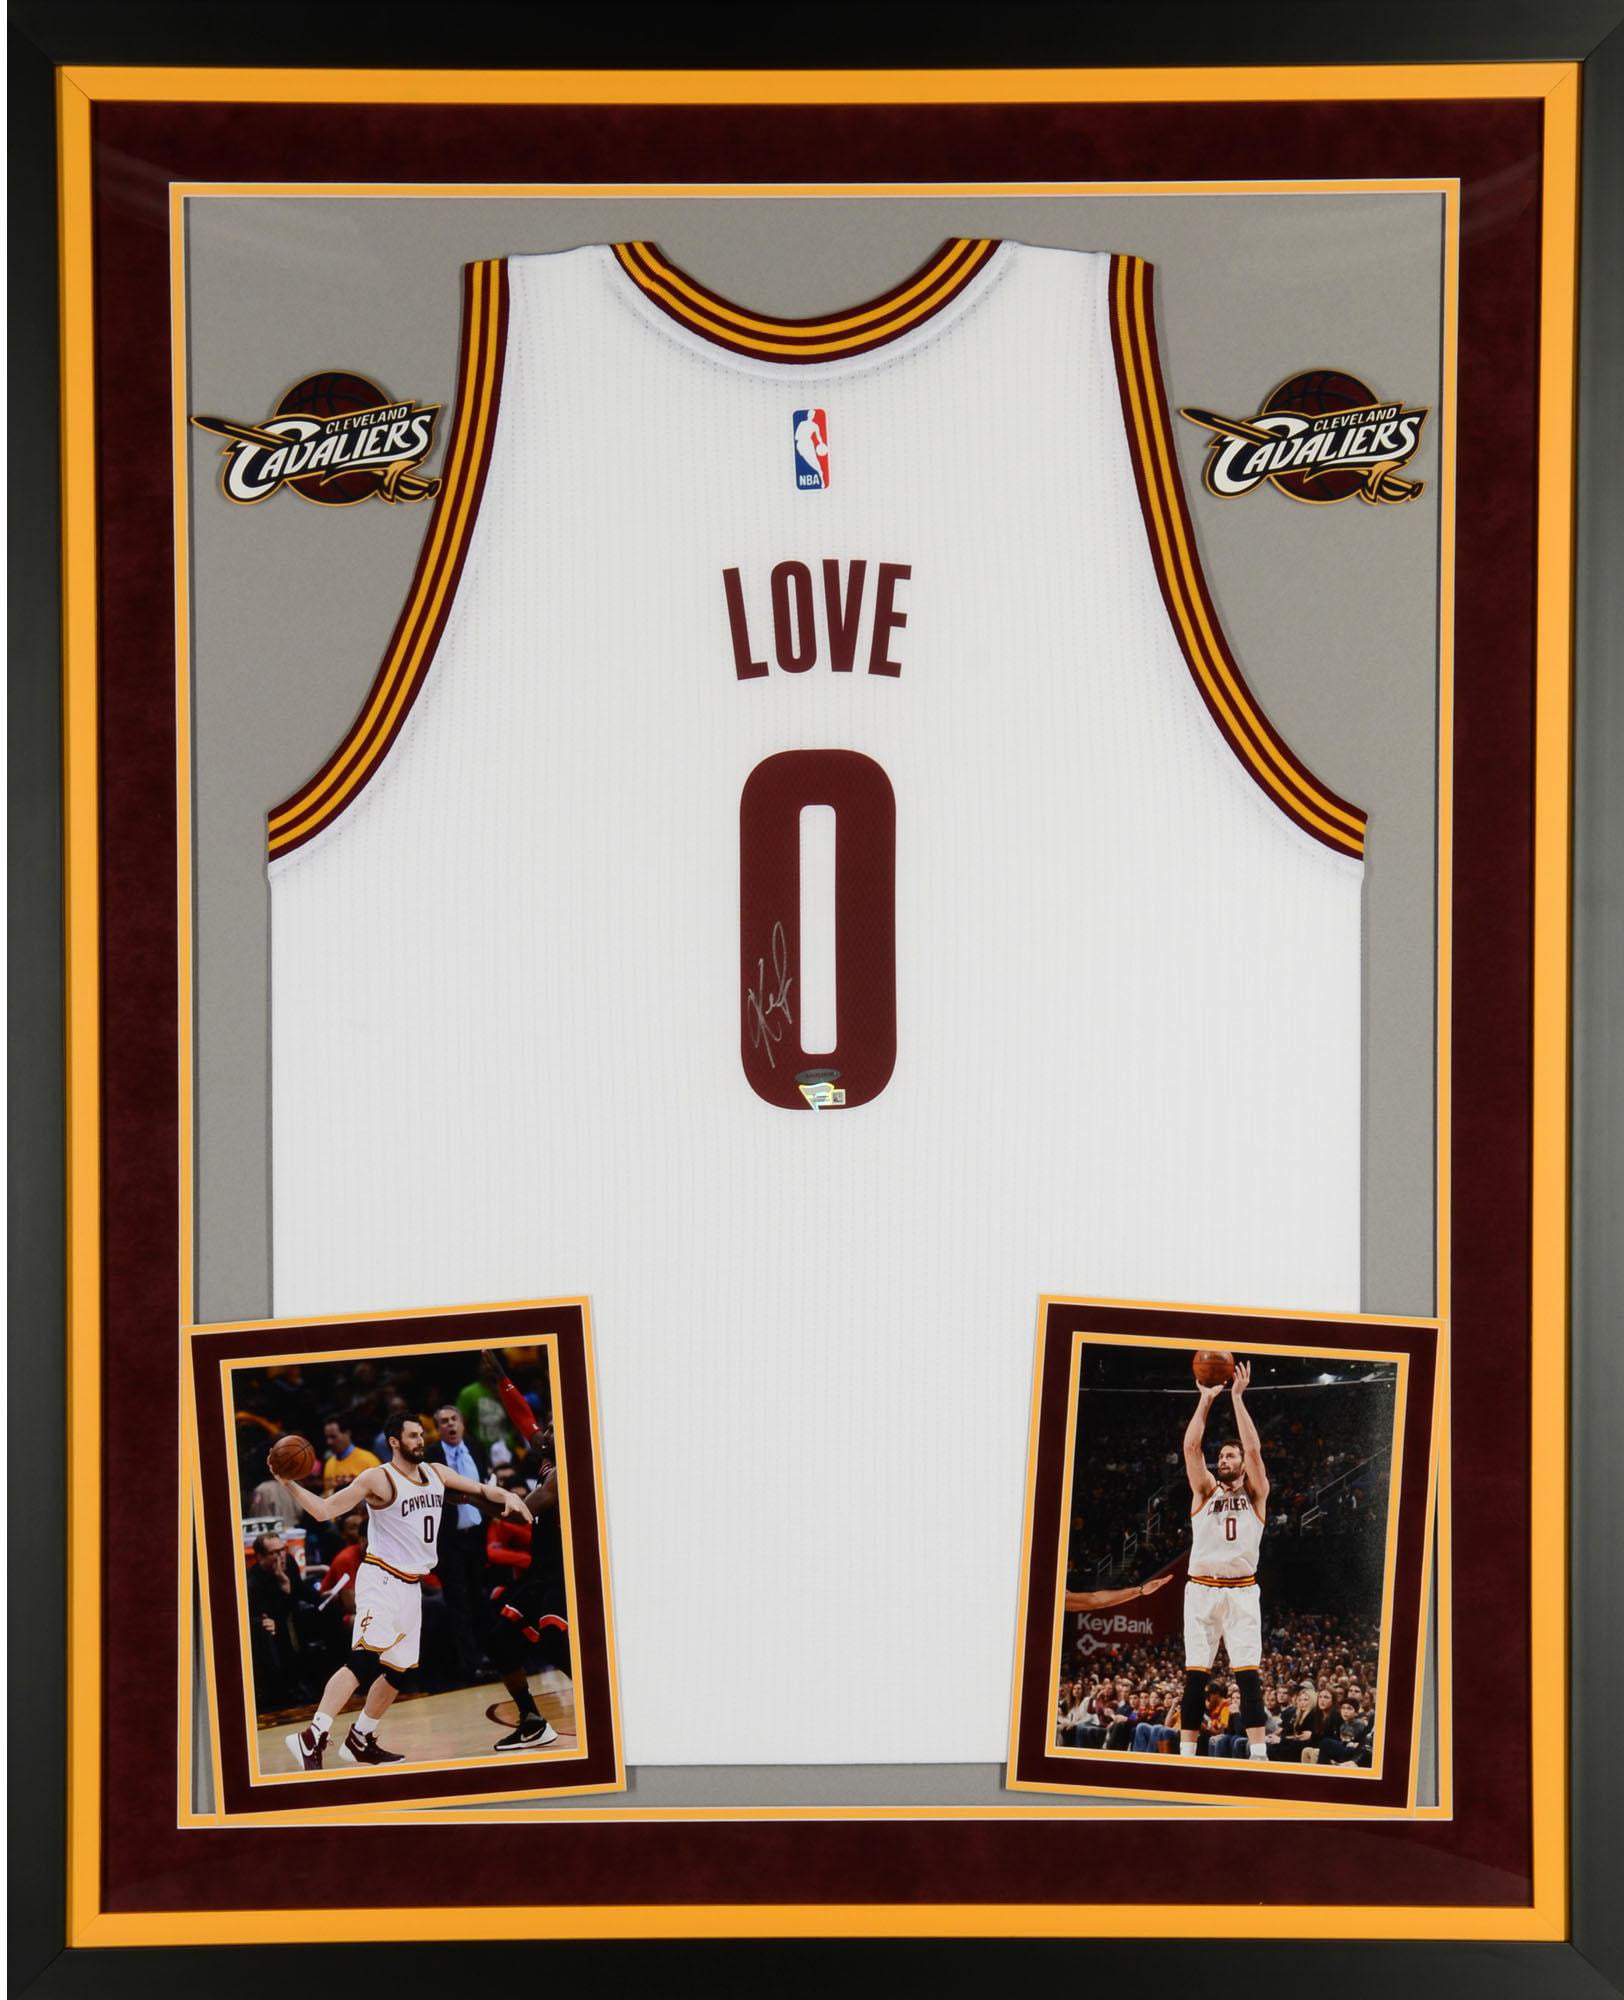 Kevin Love Cleveland Cavaliers Autographed White Adidas Swingman Jersey -  Upper Deck